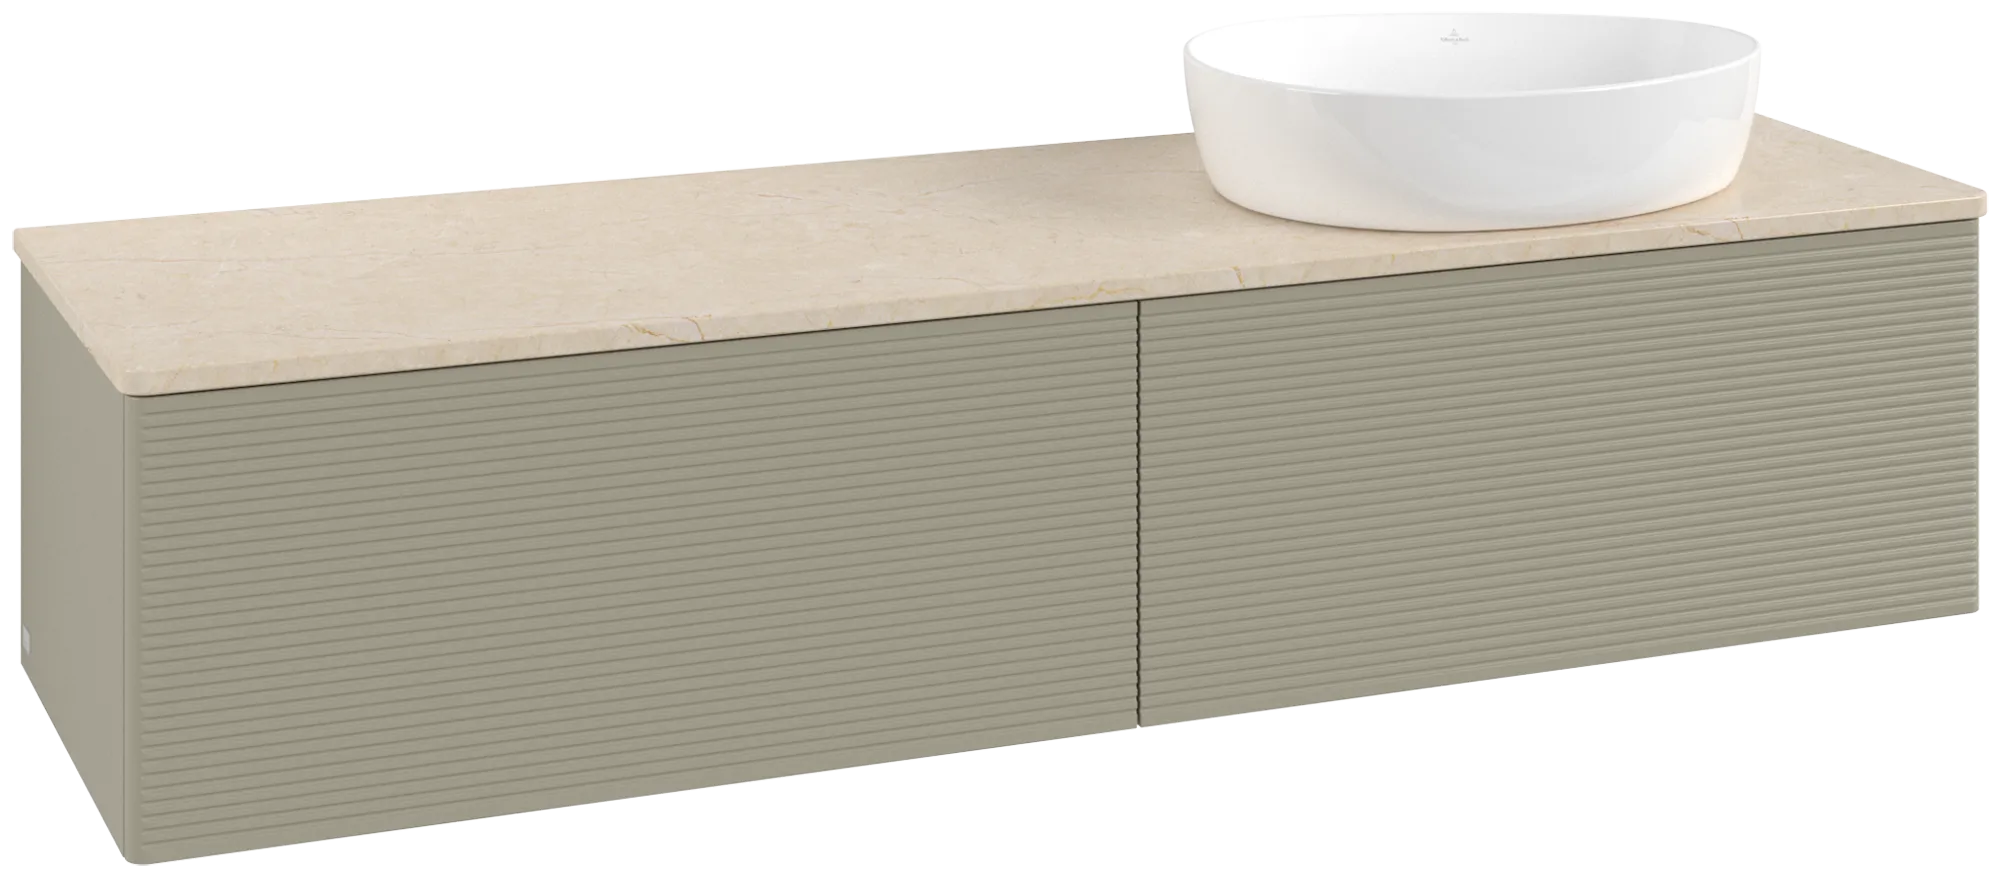 Picture of VILLEROY BOCH Antao Vanity unit, with lighting, 2 pull-out compartments, 1600 x 360 x 500 mm, Front with grain texture, Stone Grey Matt Lacquer / Botticino #L38113HK